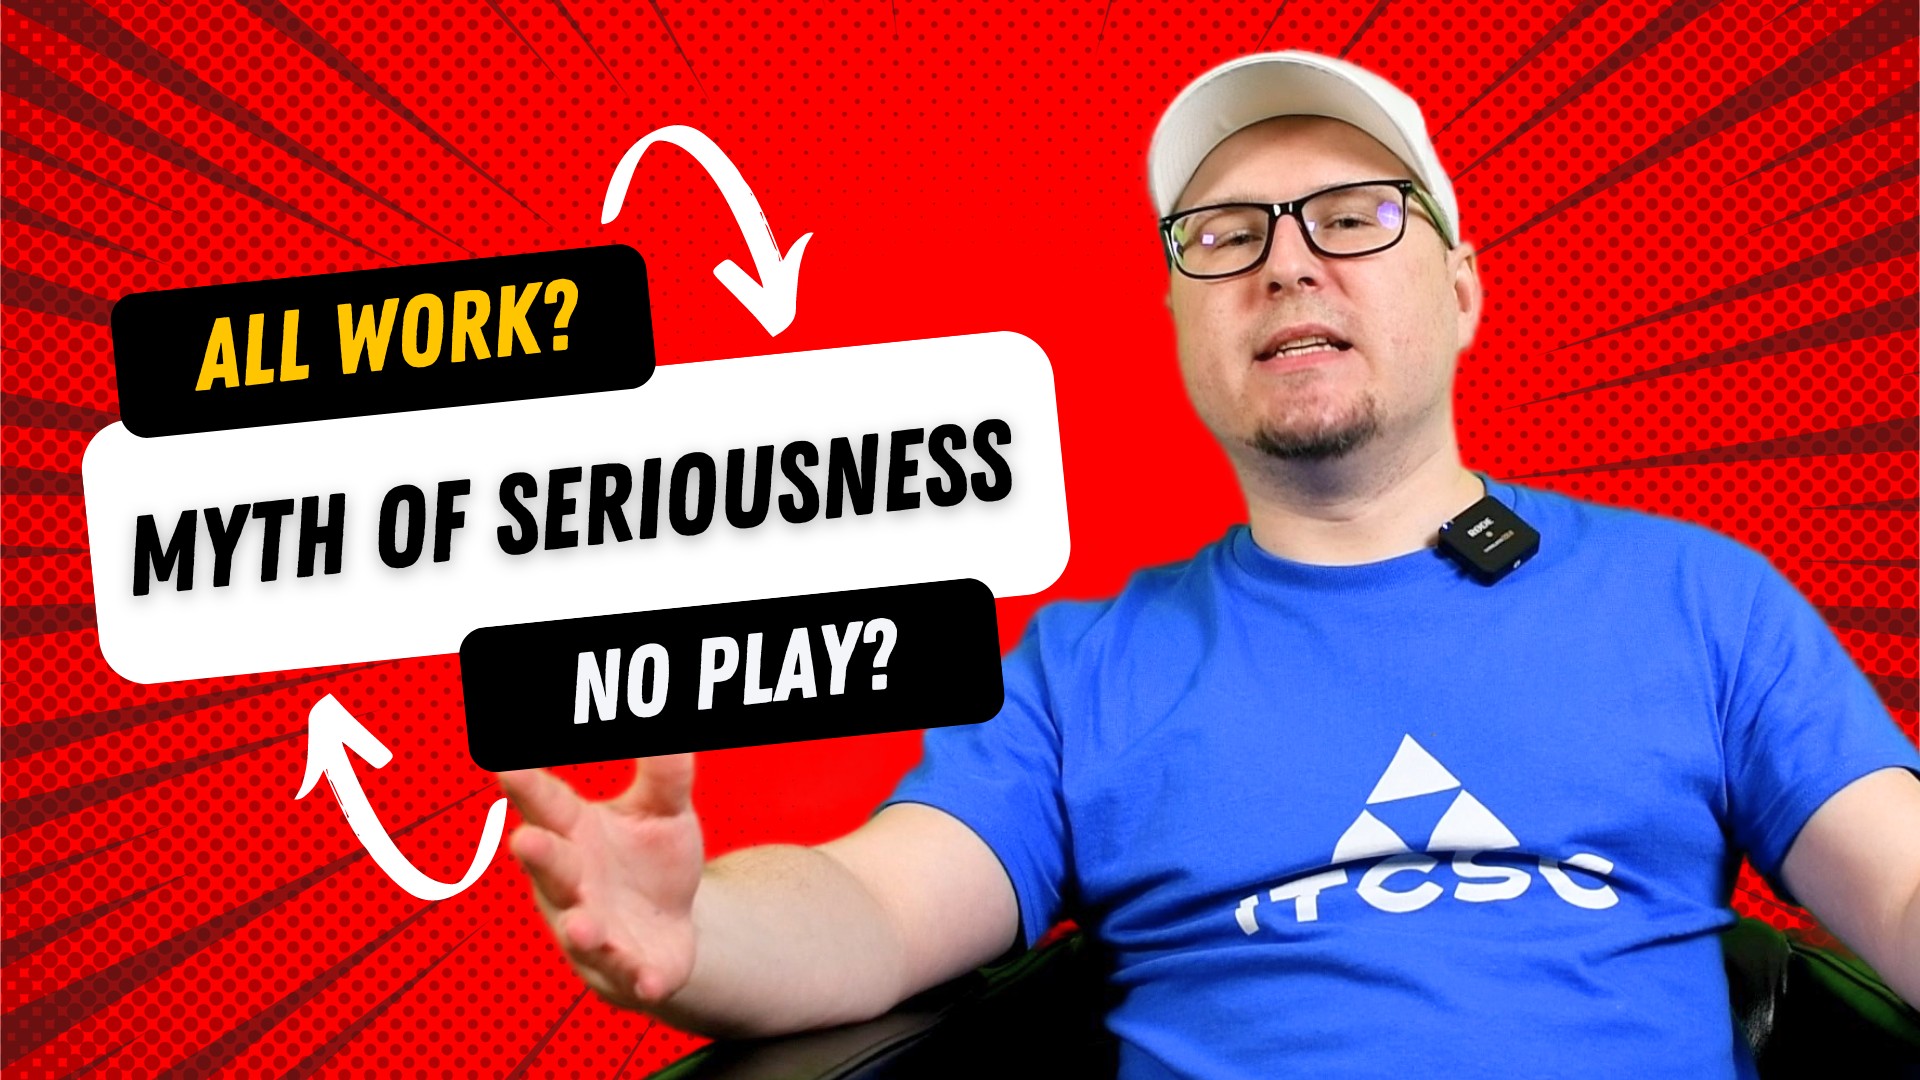 All work and no play…? Seriousness on IT.